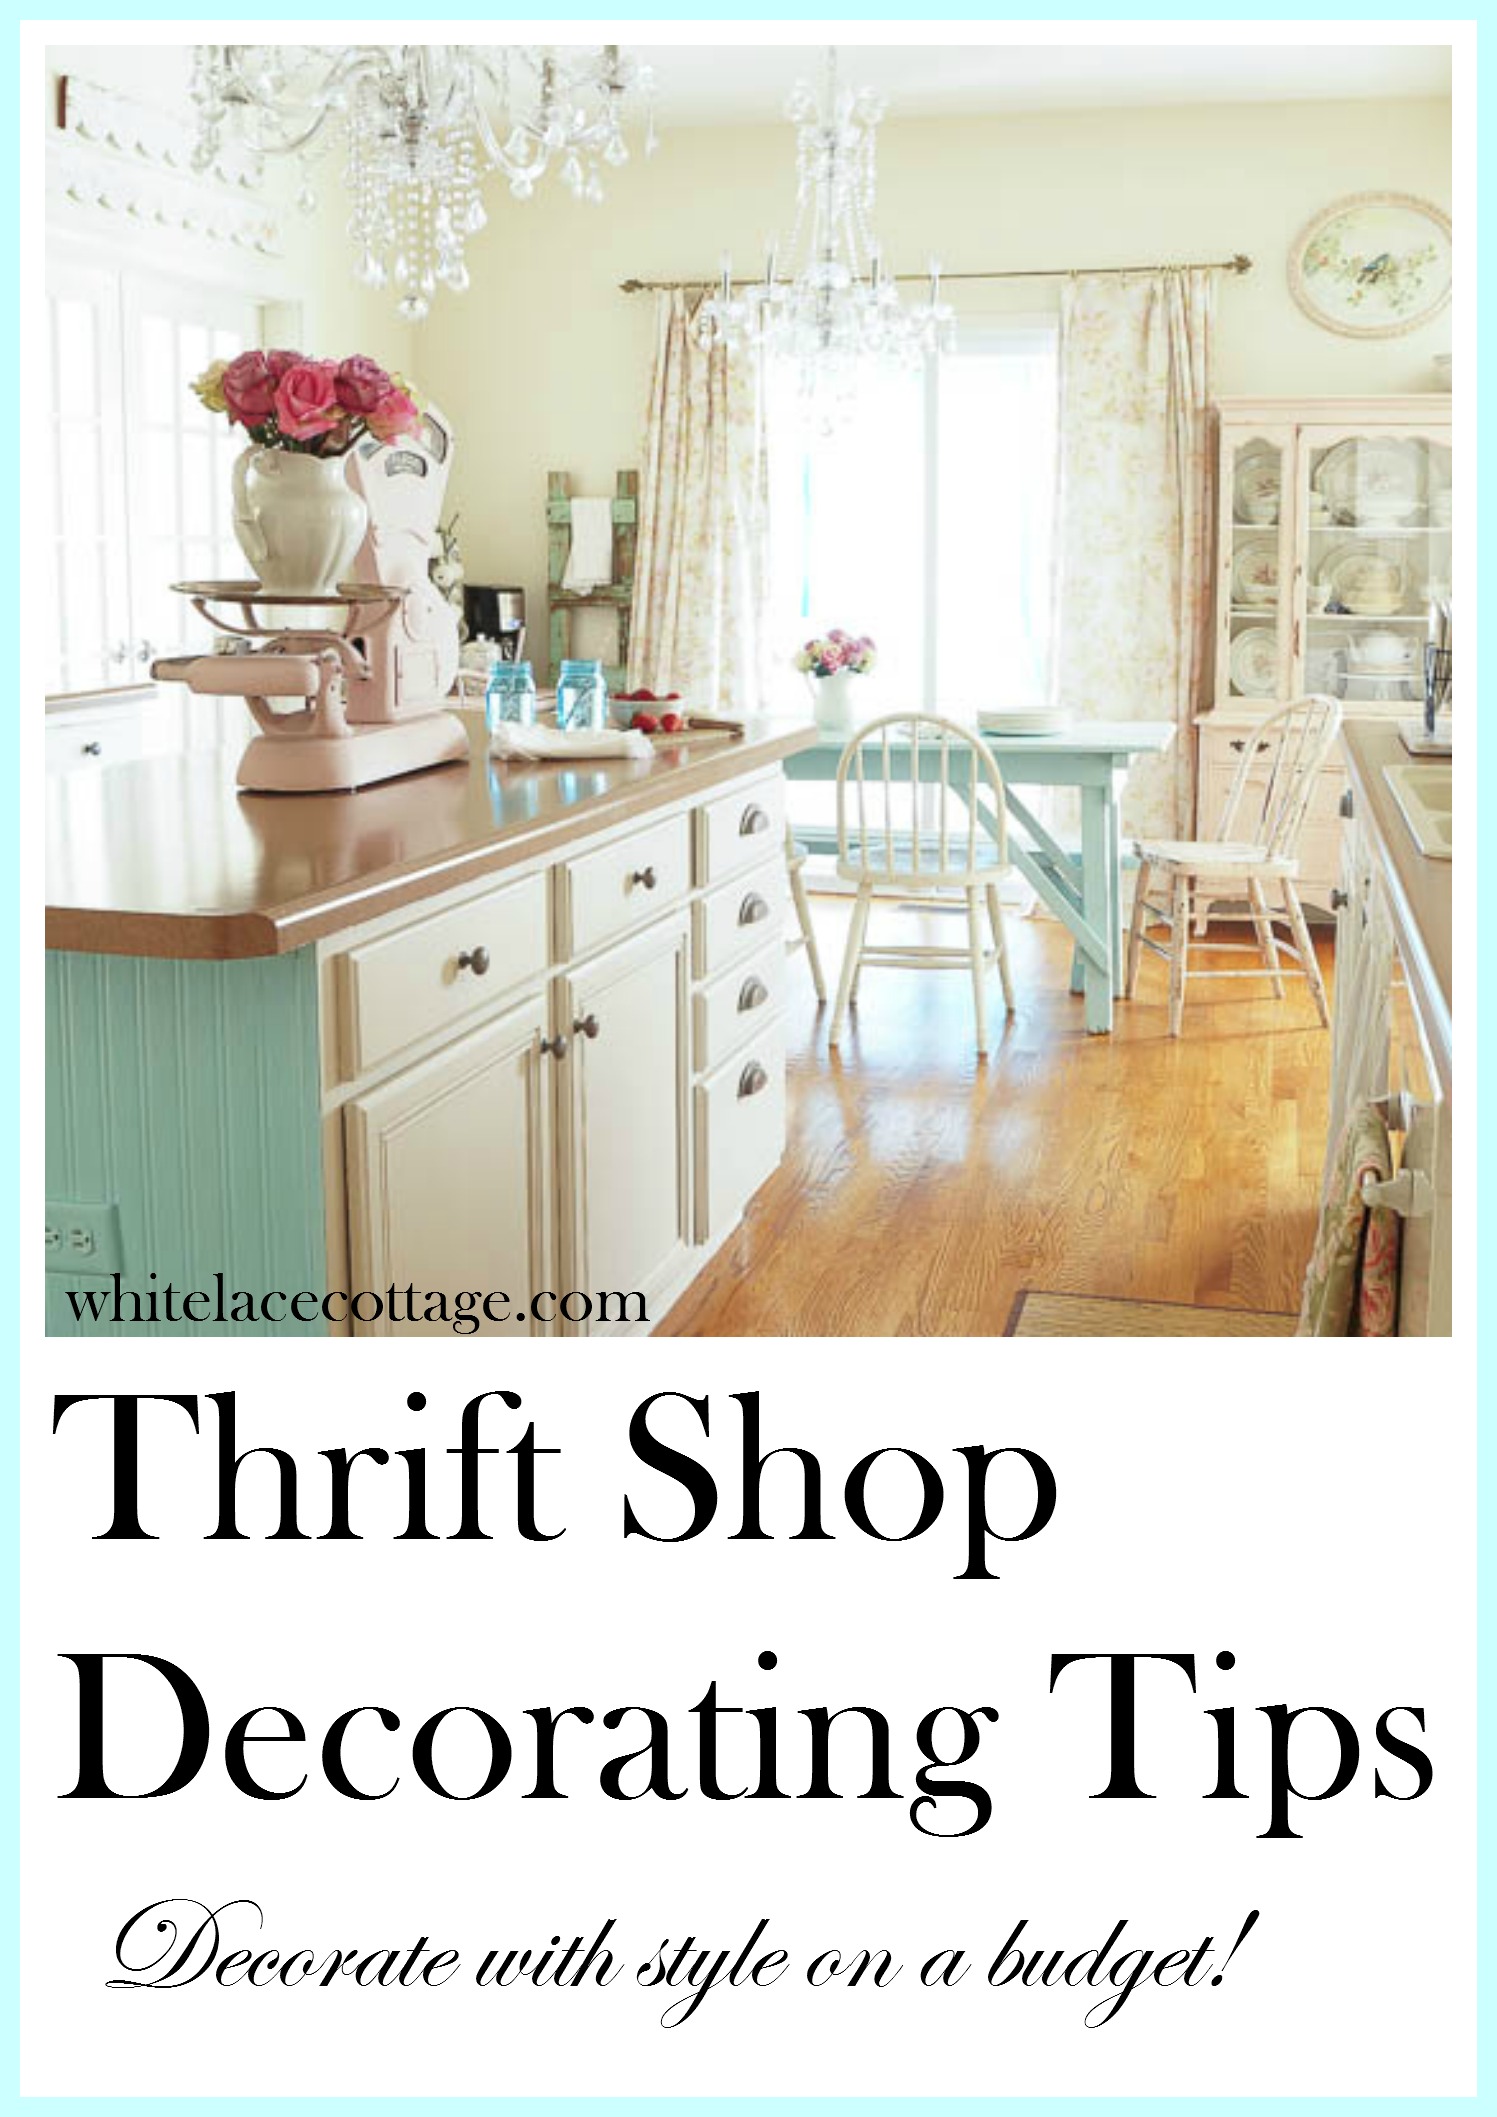 Thrift Shop Decorating Tips - White Lace Cottage